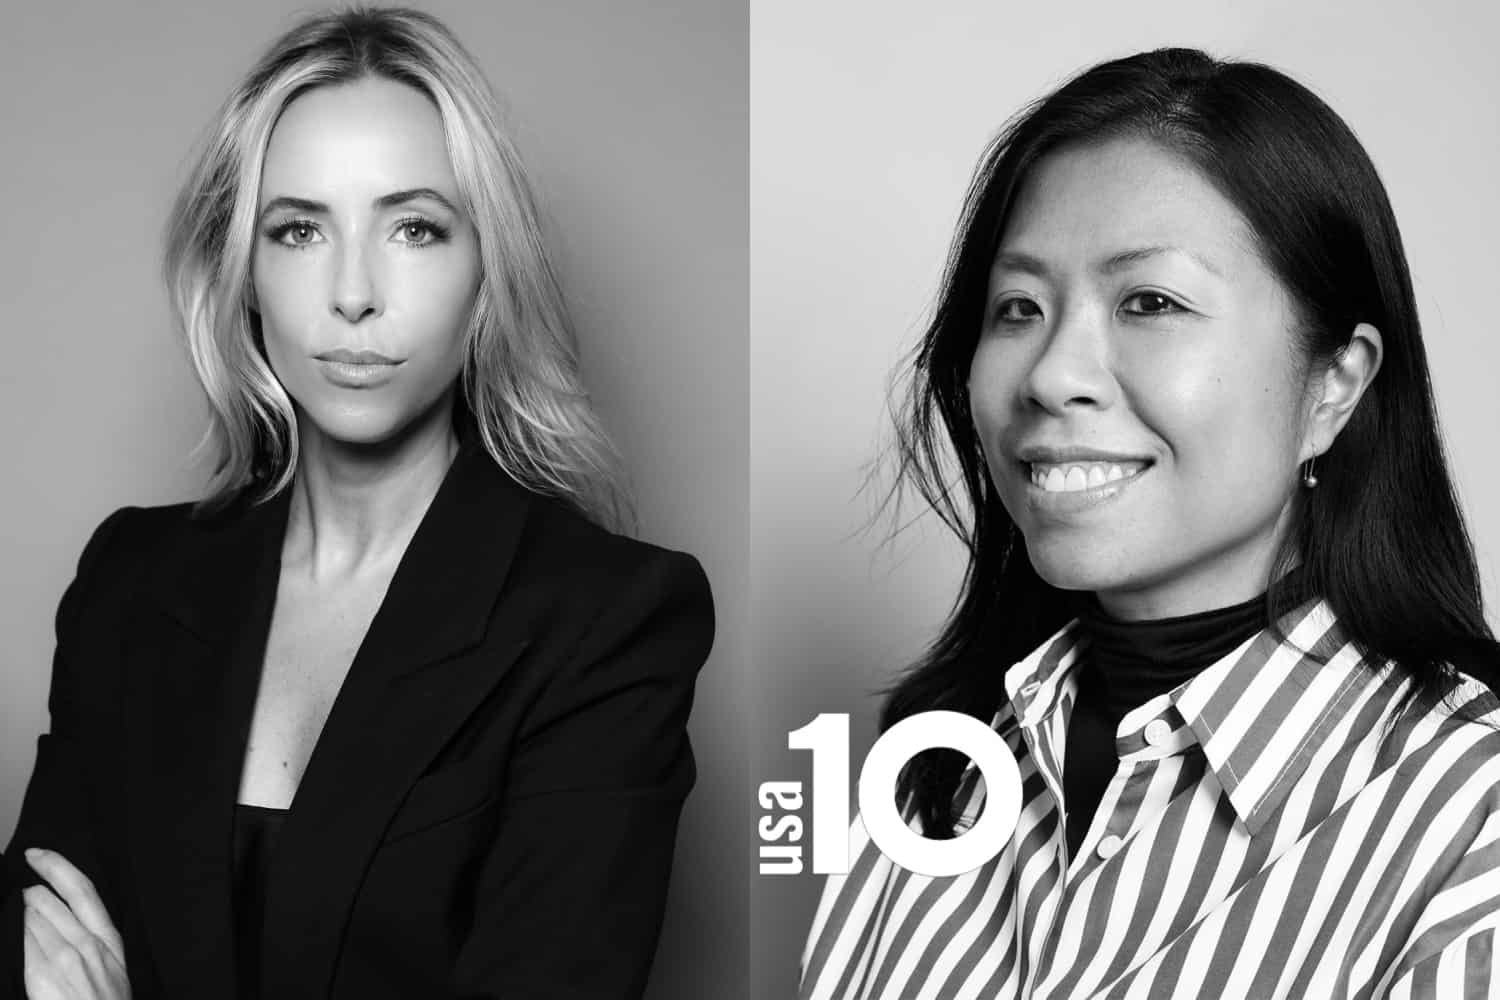 10 Magazine USA To Launch, Julie Beynon Named VP Of Communications & Marketing At Givenchy, And More!